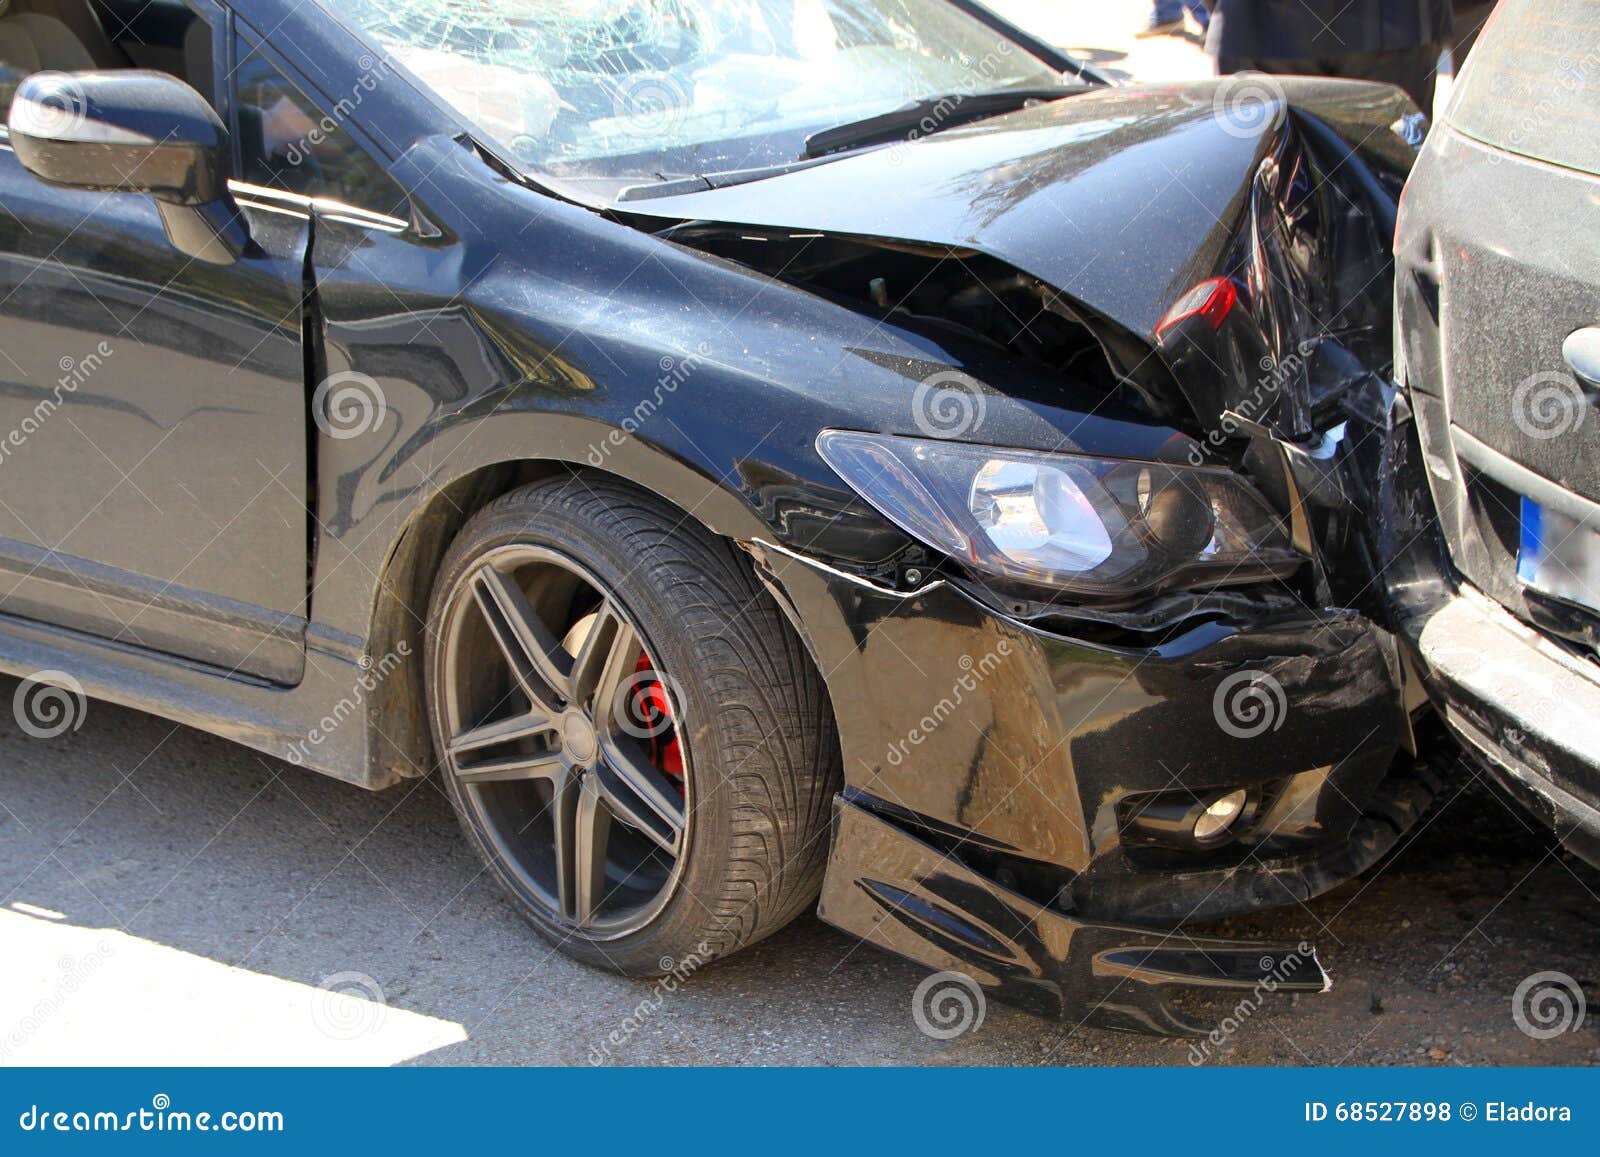 Two Cars Accident Crashed Cars Red Coup Sedan Back Big Stock Photo